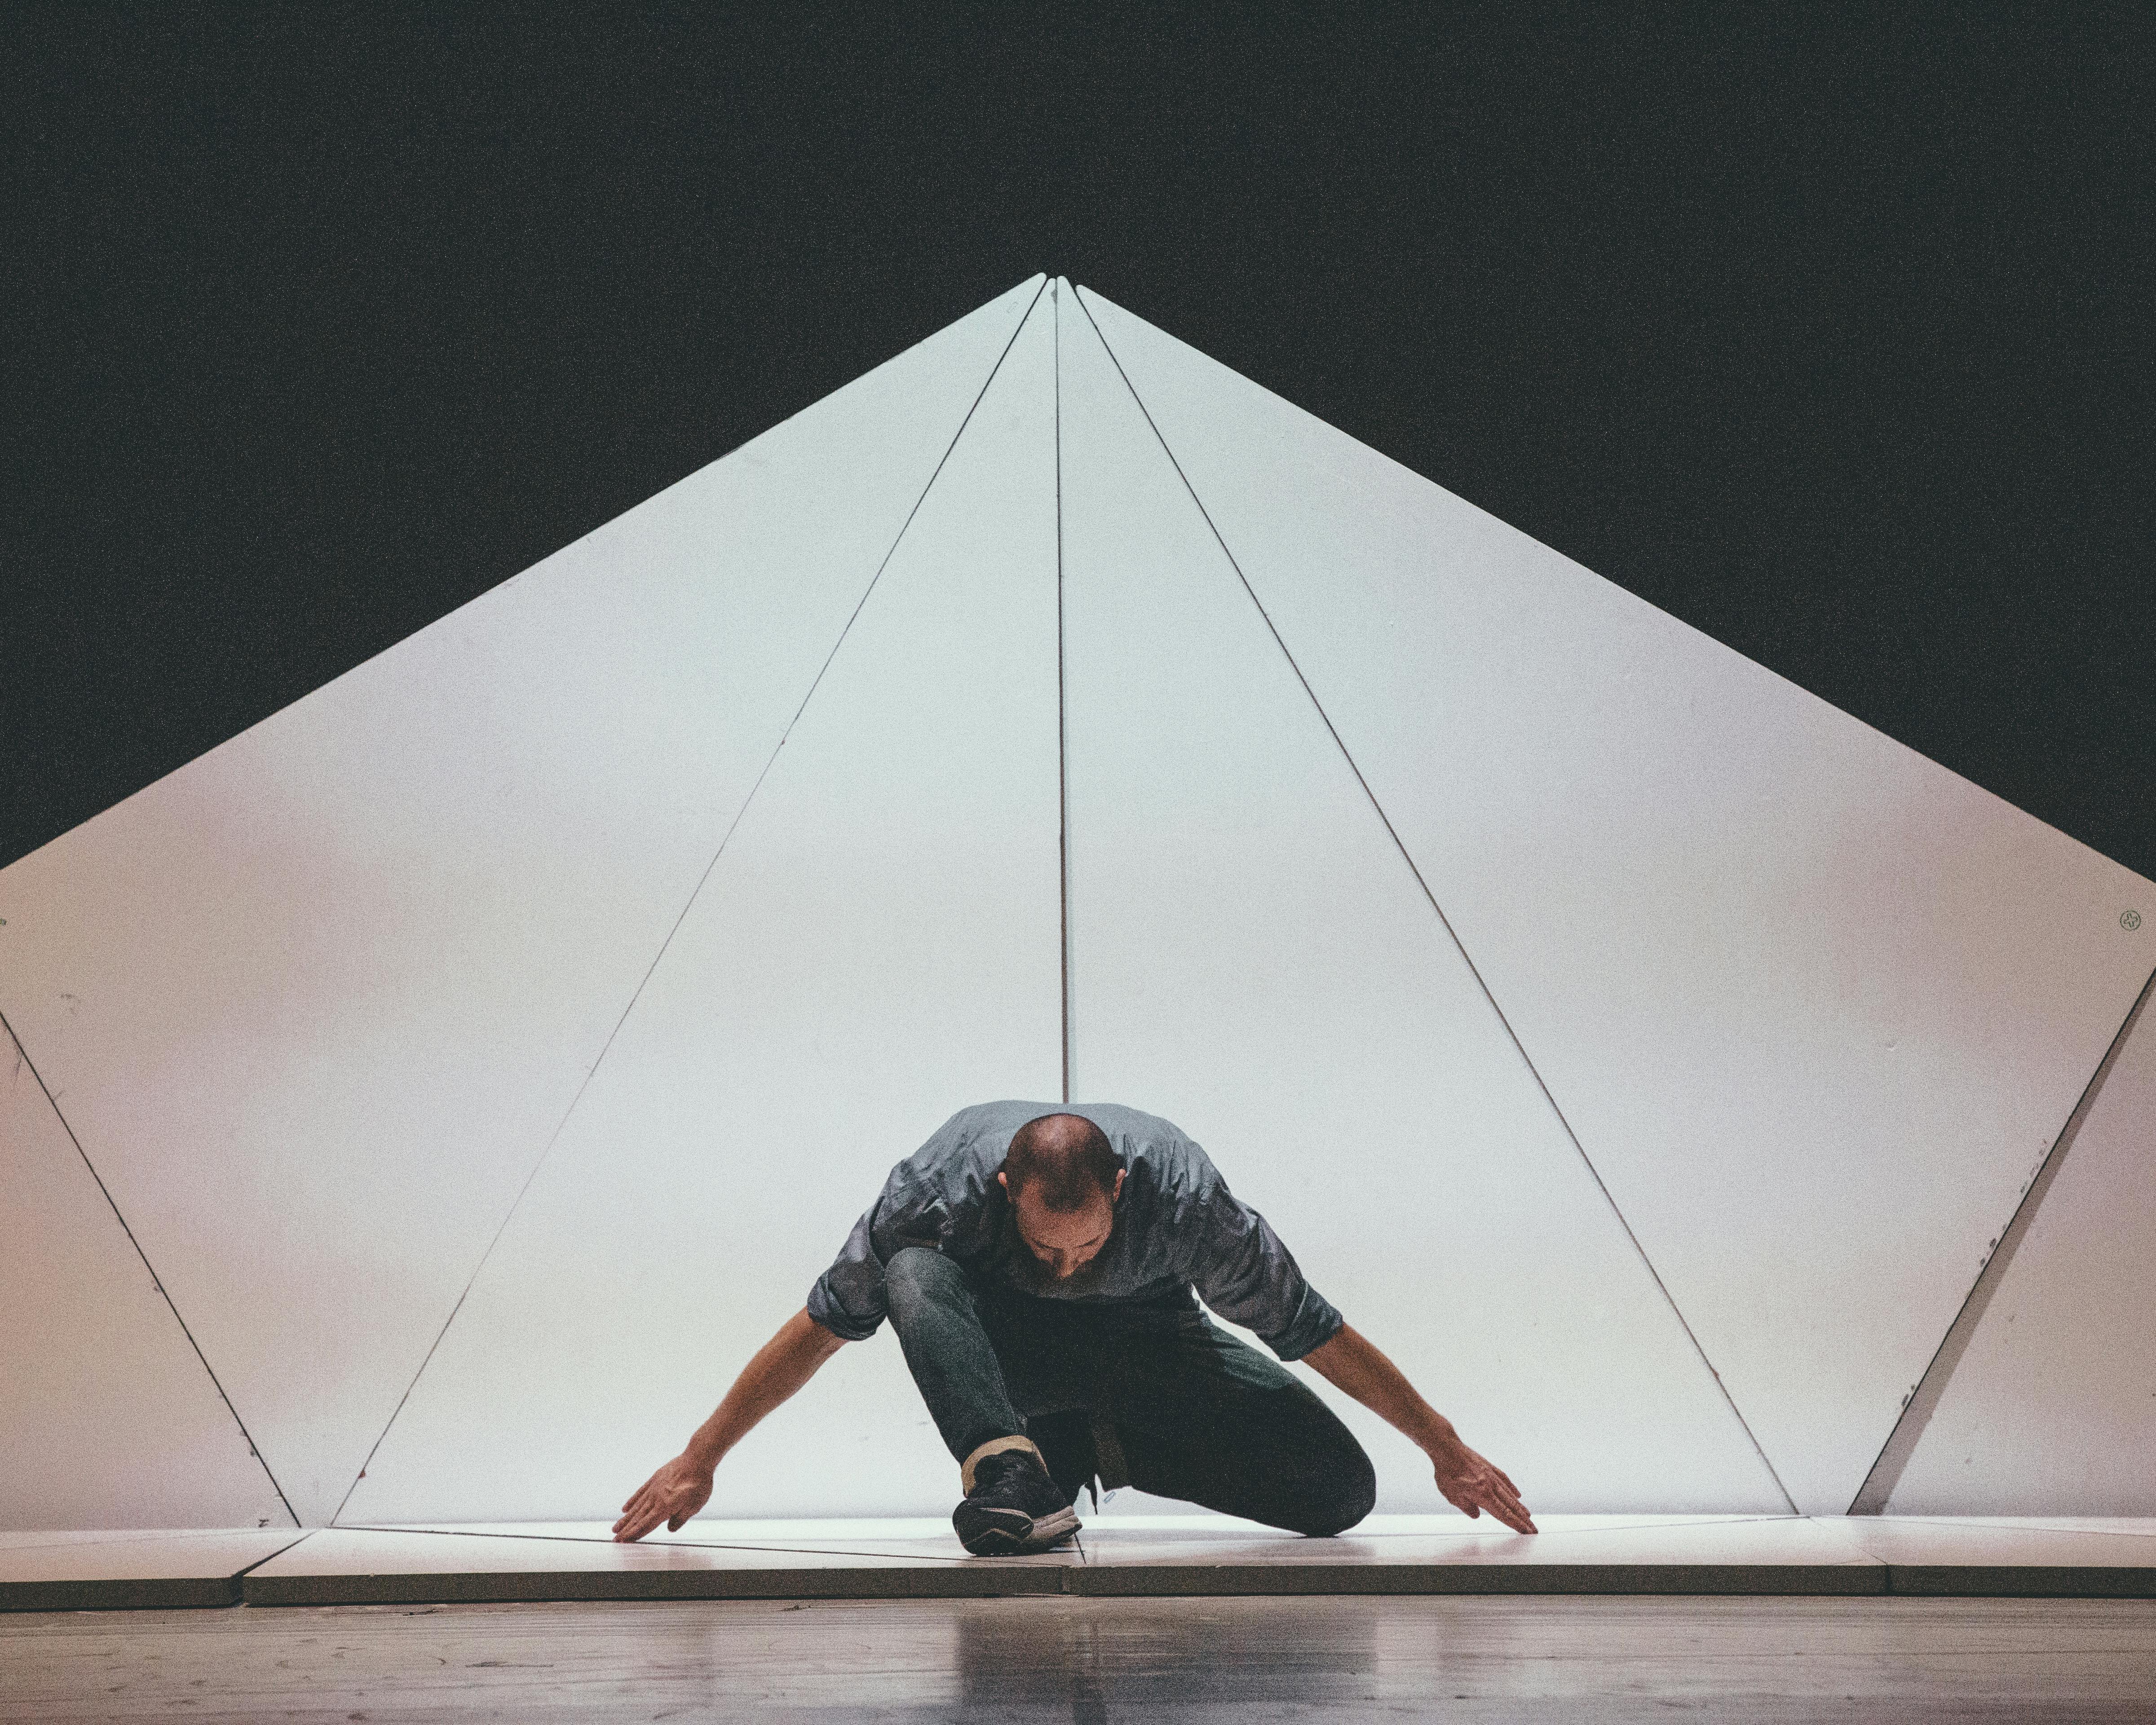 At the centre of the stage, a dancer crouched on the ground. Behind, a white pyramid-shaped canvas on a black background.